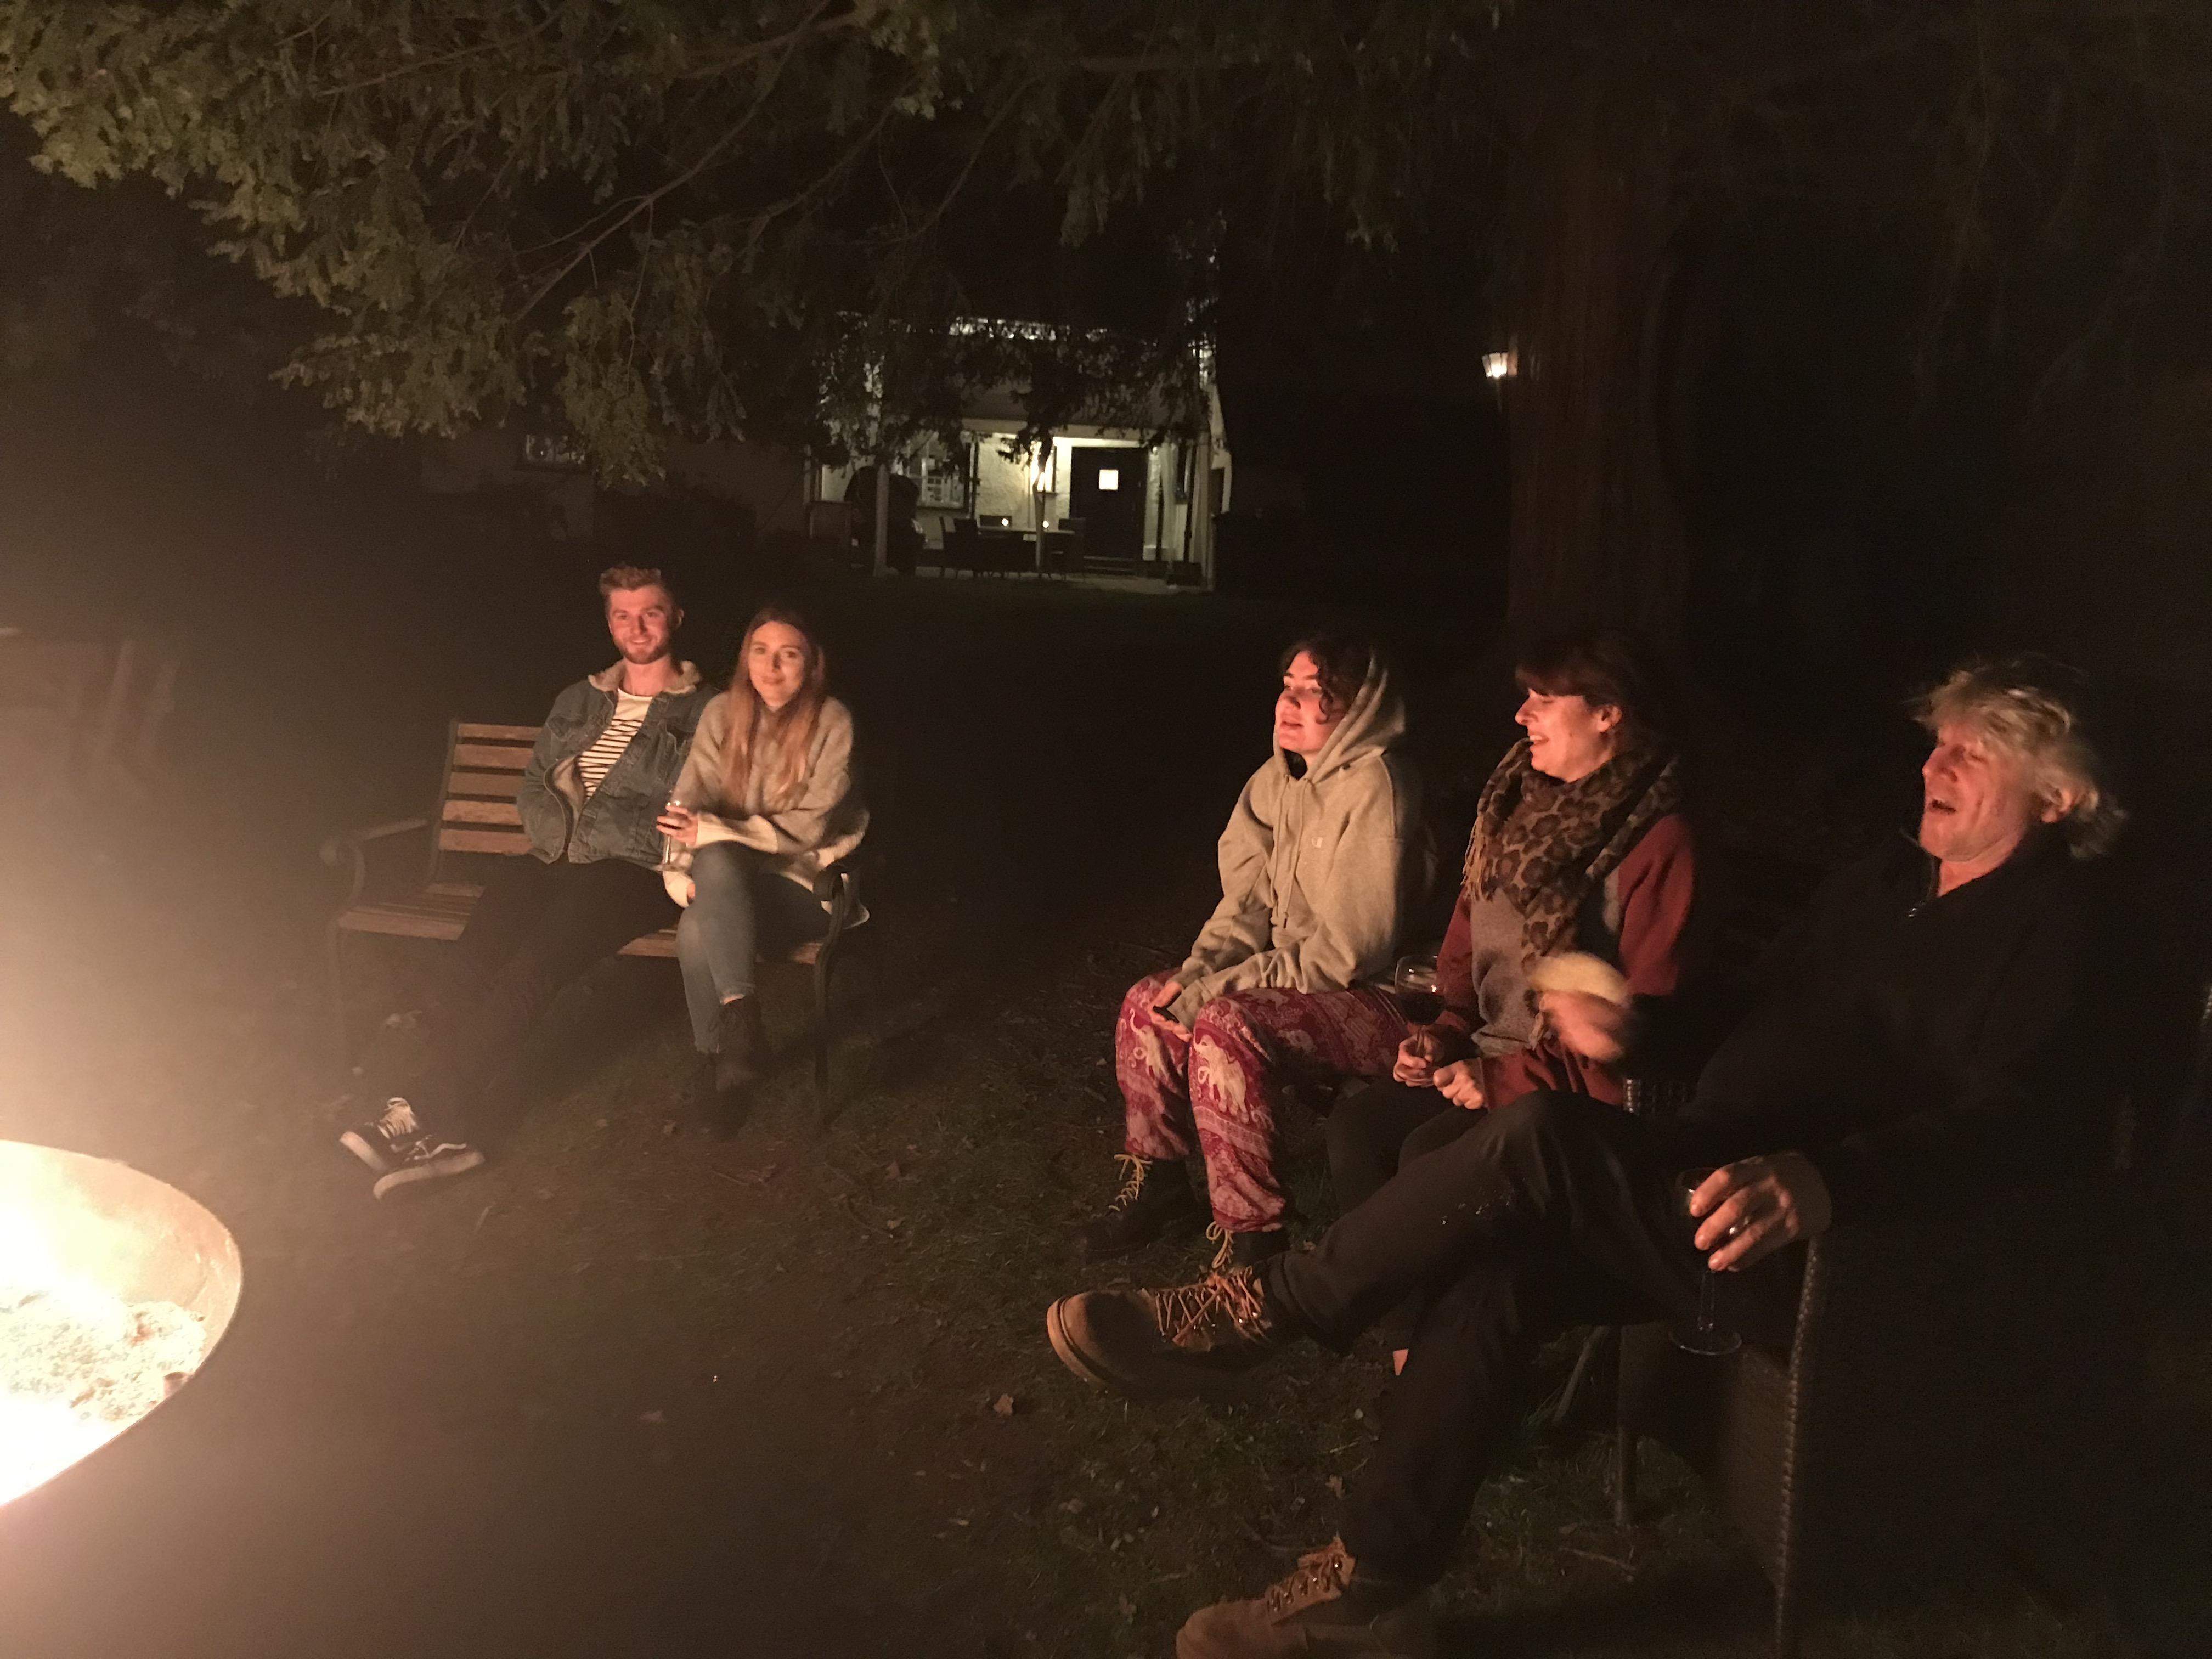 Our group around the campfire keeping warm on a chilly night